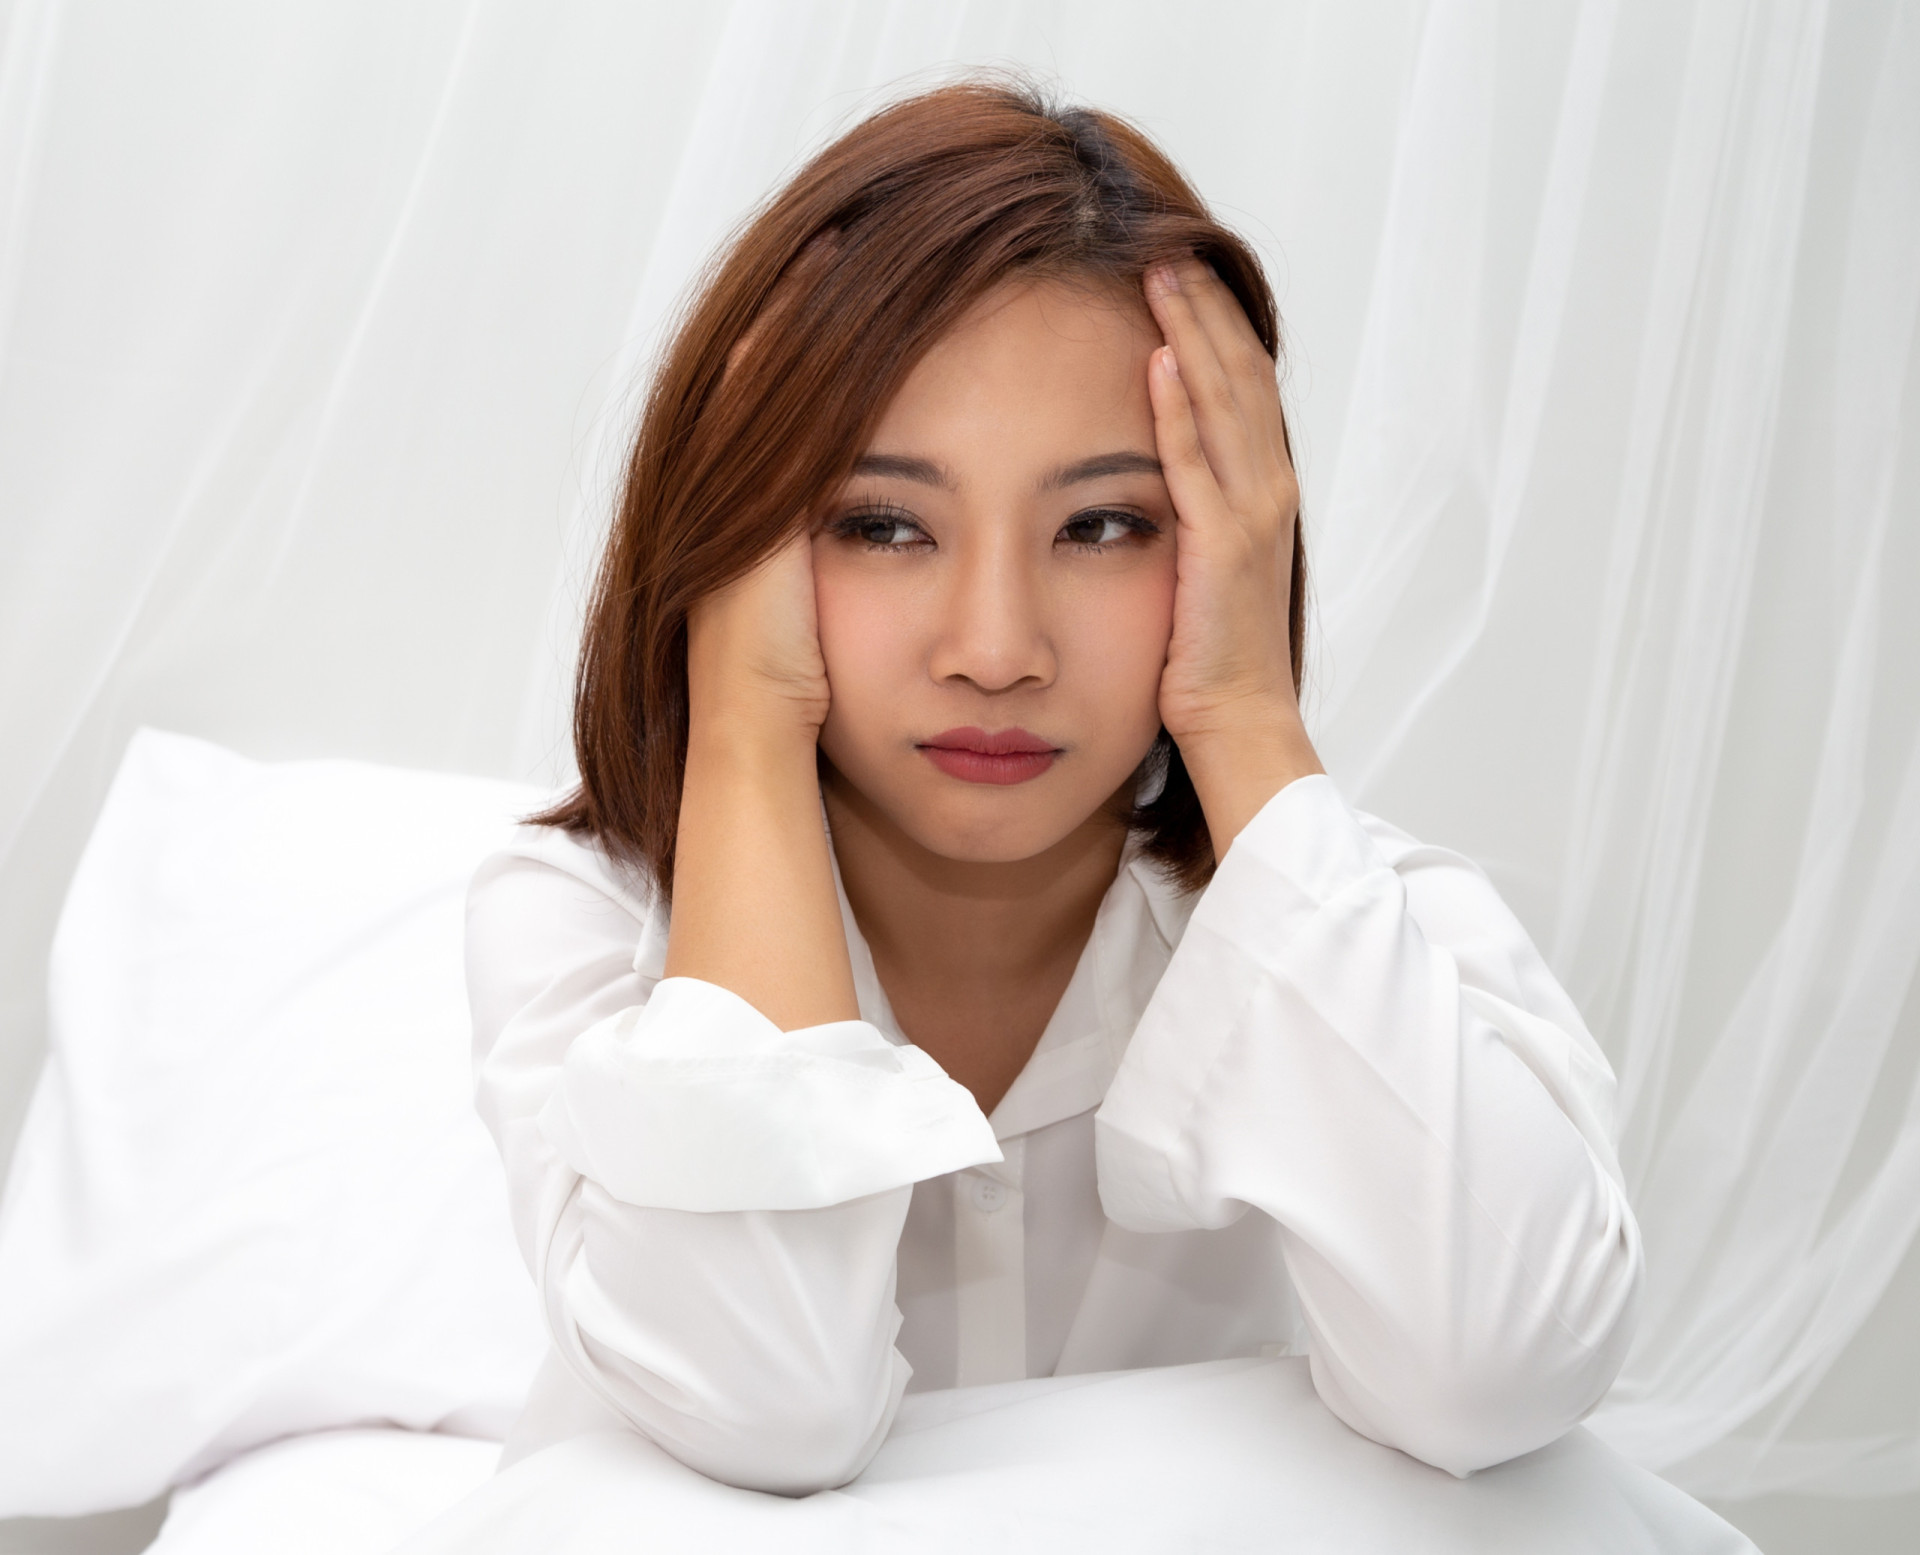 <p>Excessive feelings of guilt may well be down to what's known as postpartum depression, the "baby blues" after childbirth experienced by new mothers, the symptoms of which commonly include mood swings, crying spells, <a href="https://www.starsinsider.com/health/433676/how-stress-can-harm-your-physical-health" rel="noopener">stress</a>, anxiety, and difficulty sleeping.</p><p>You may also like:<a href="https://www.starsinsider.com/n/438203?utm_source=msn.com&utm_medium=display&utm_campaign=referral_description&utm_content=548172en-en"> Fascinating uses for hairspray you've never heard of</a></p>